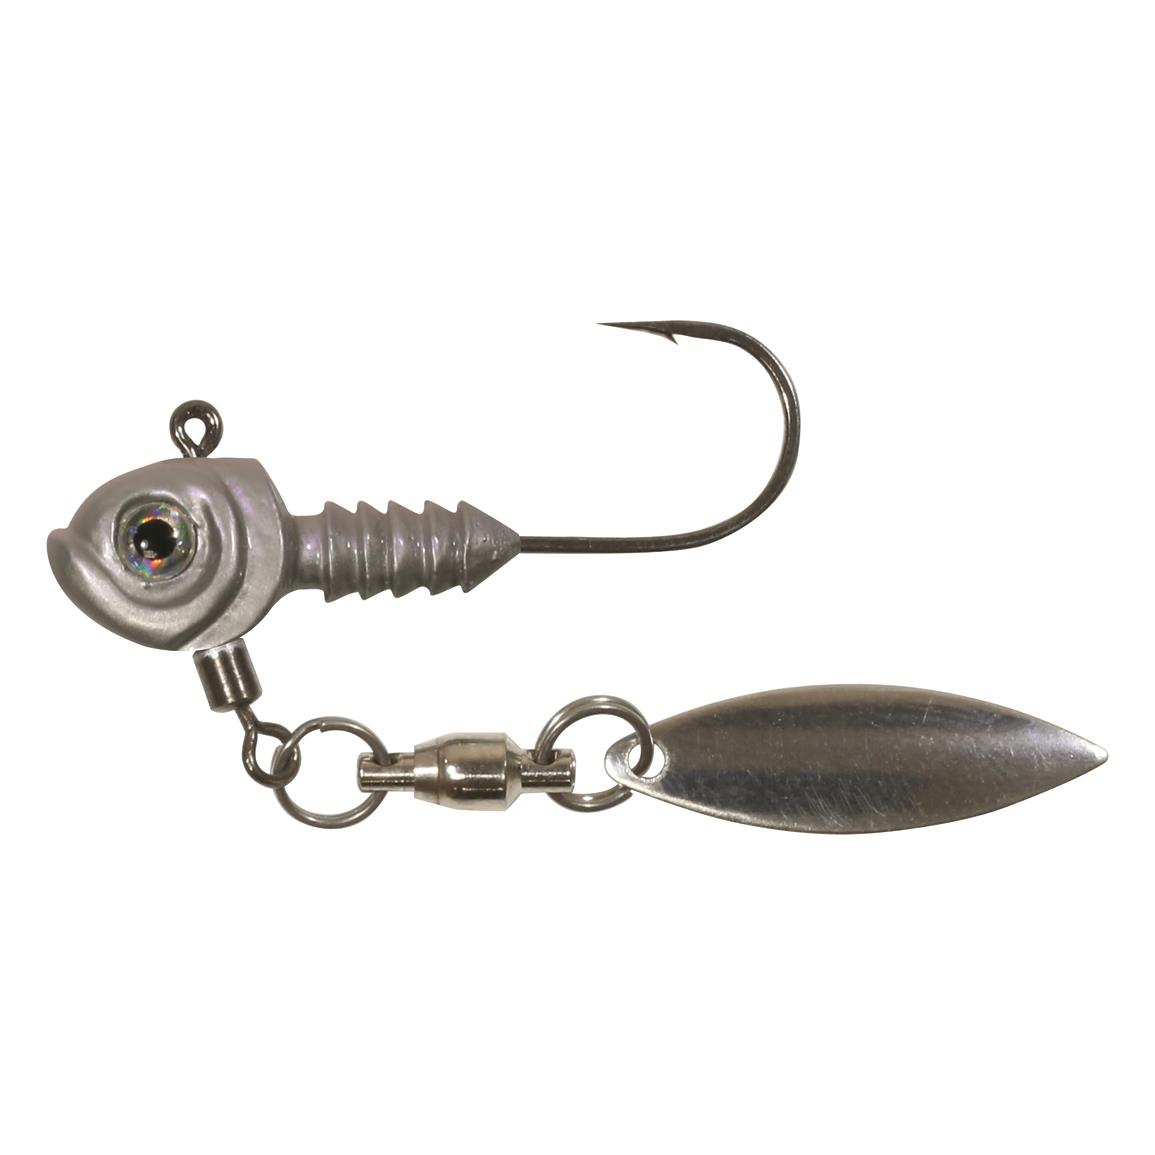 Mr. Crappie Jig Heads, 8 Pack - 733324, Jigs at Sportsman's Guide